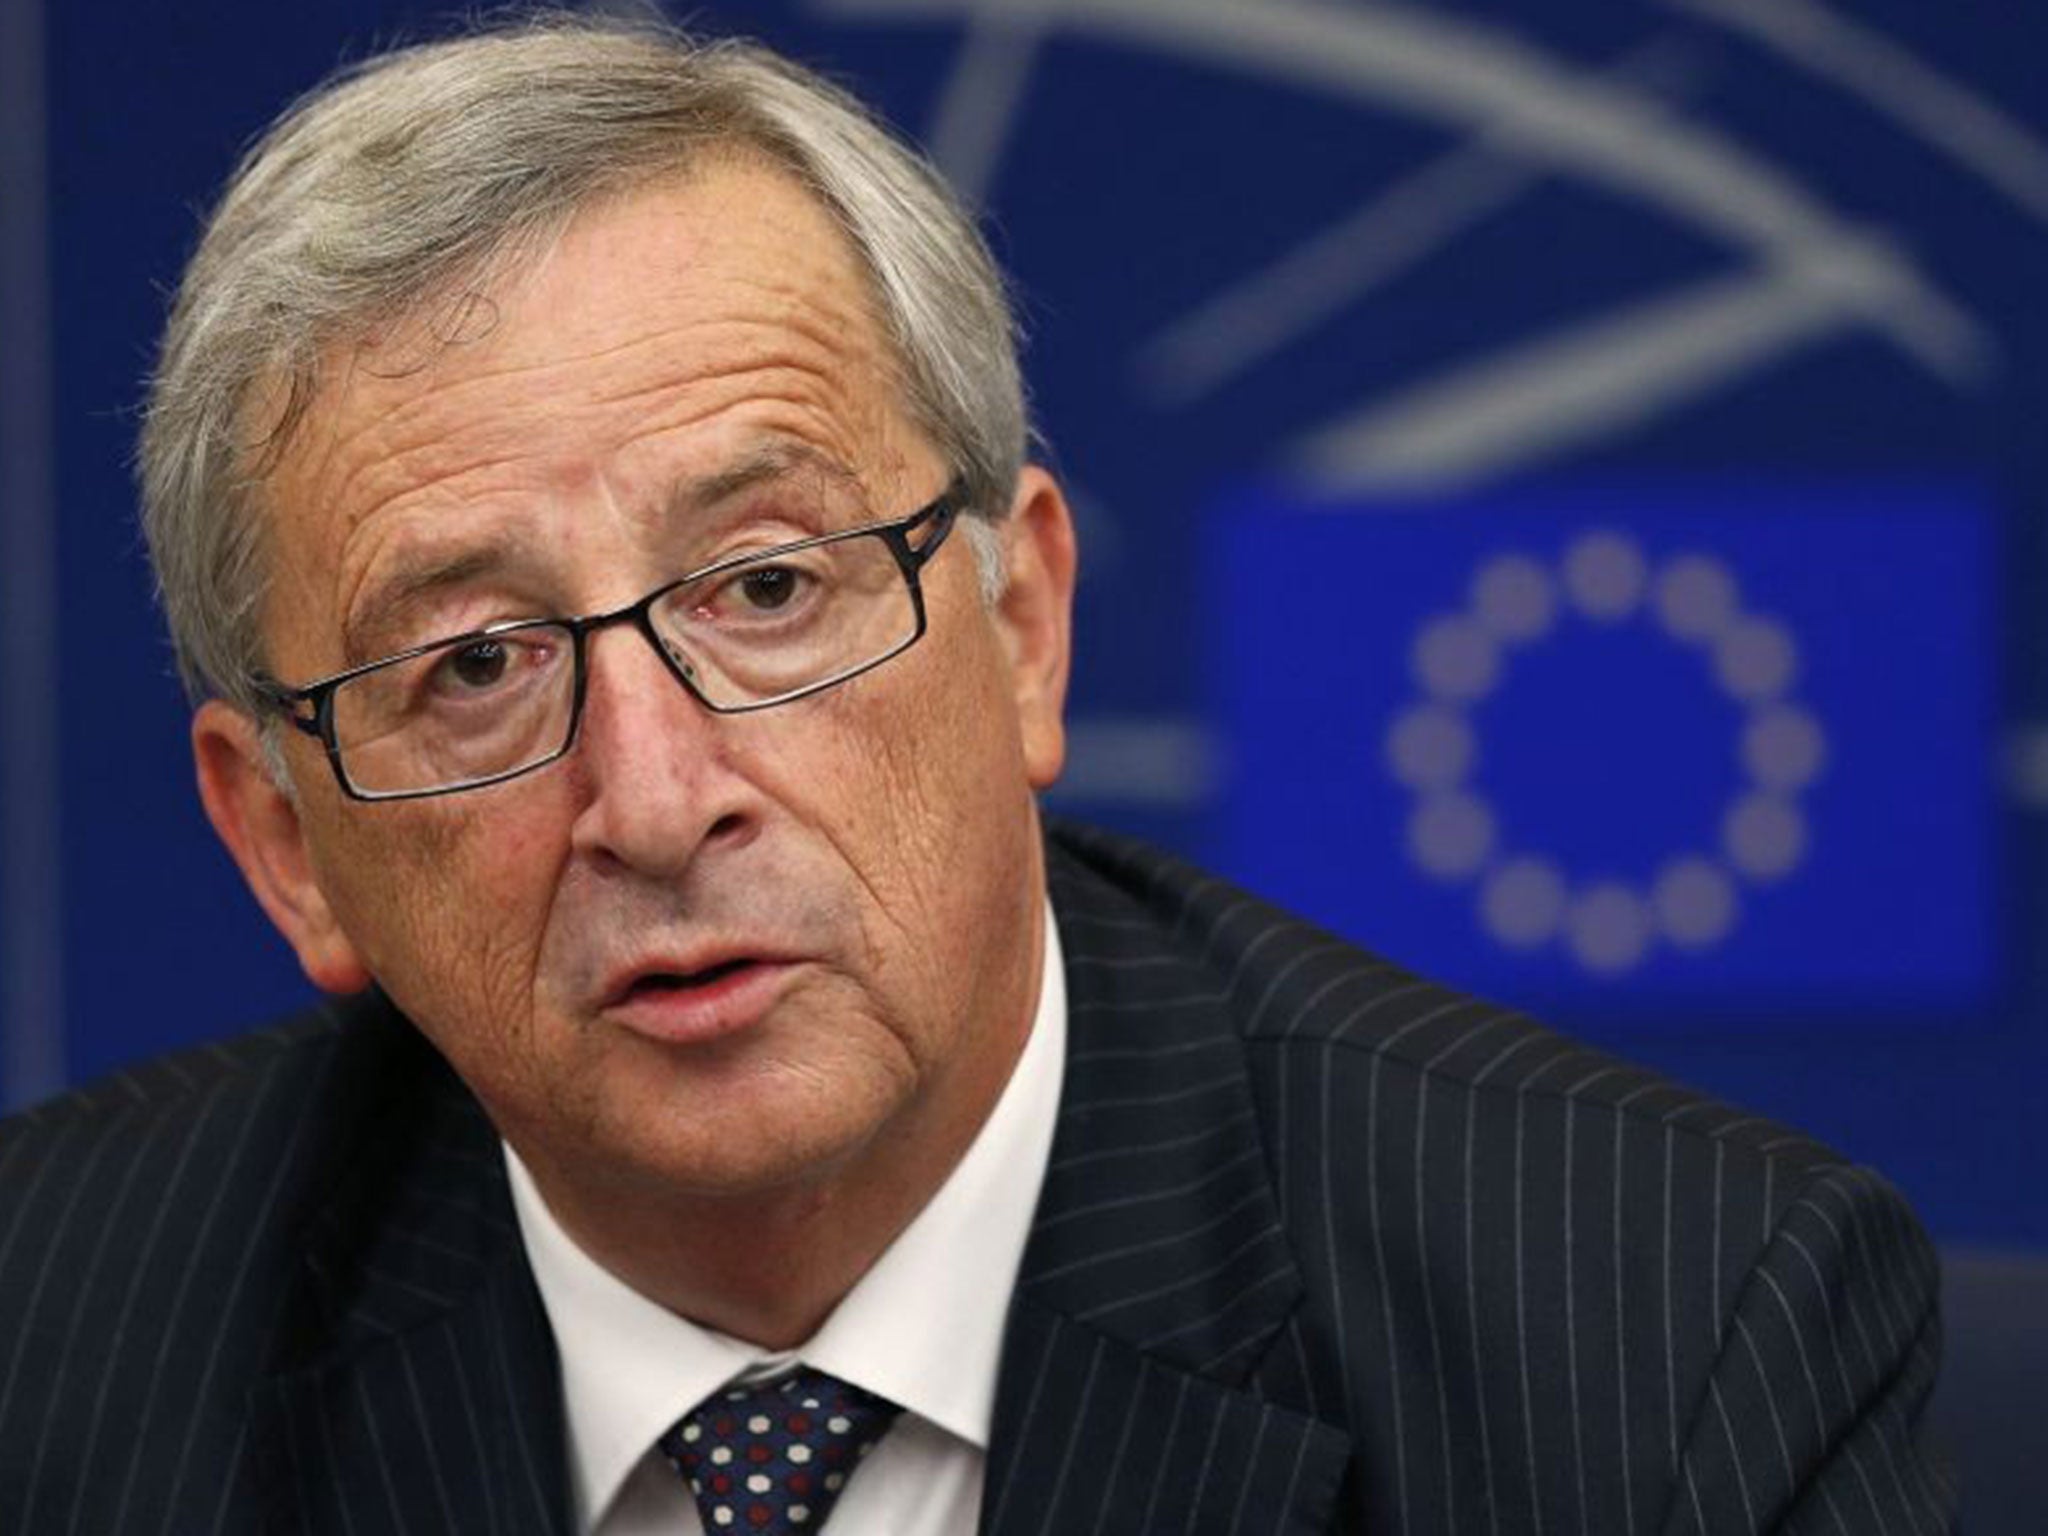 Elected president of the European Commission Jean-Claude Juncker answers journalists questions during a press briefing after his election at the European Parliament in Strasbourg, July 15, 2014.